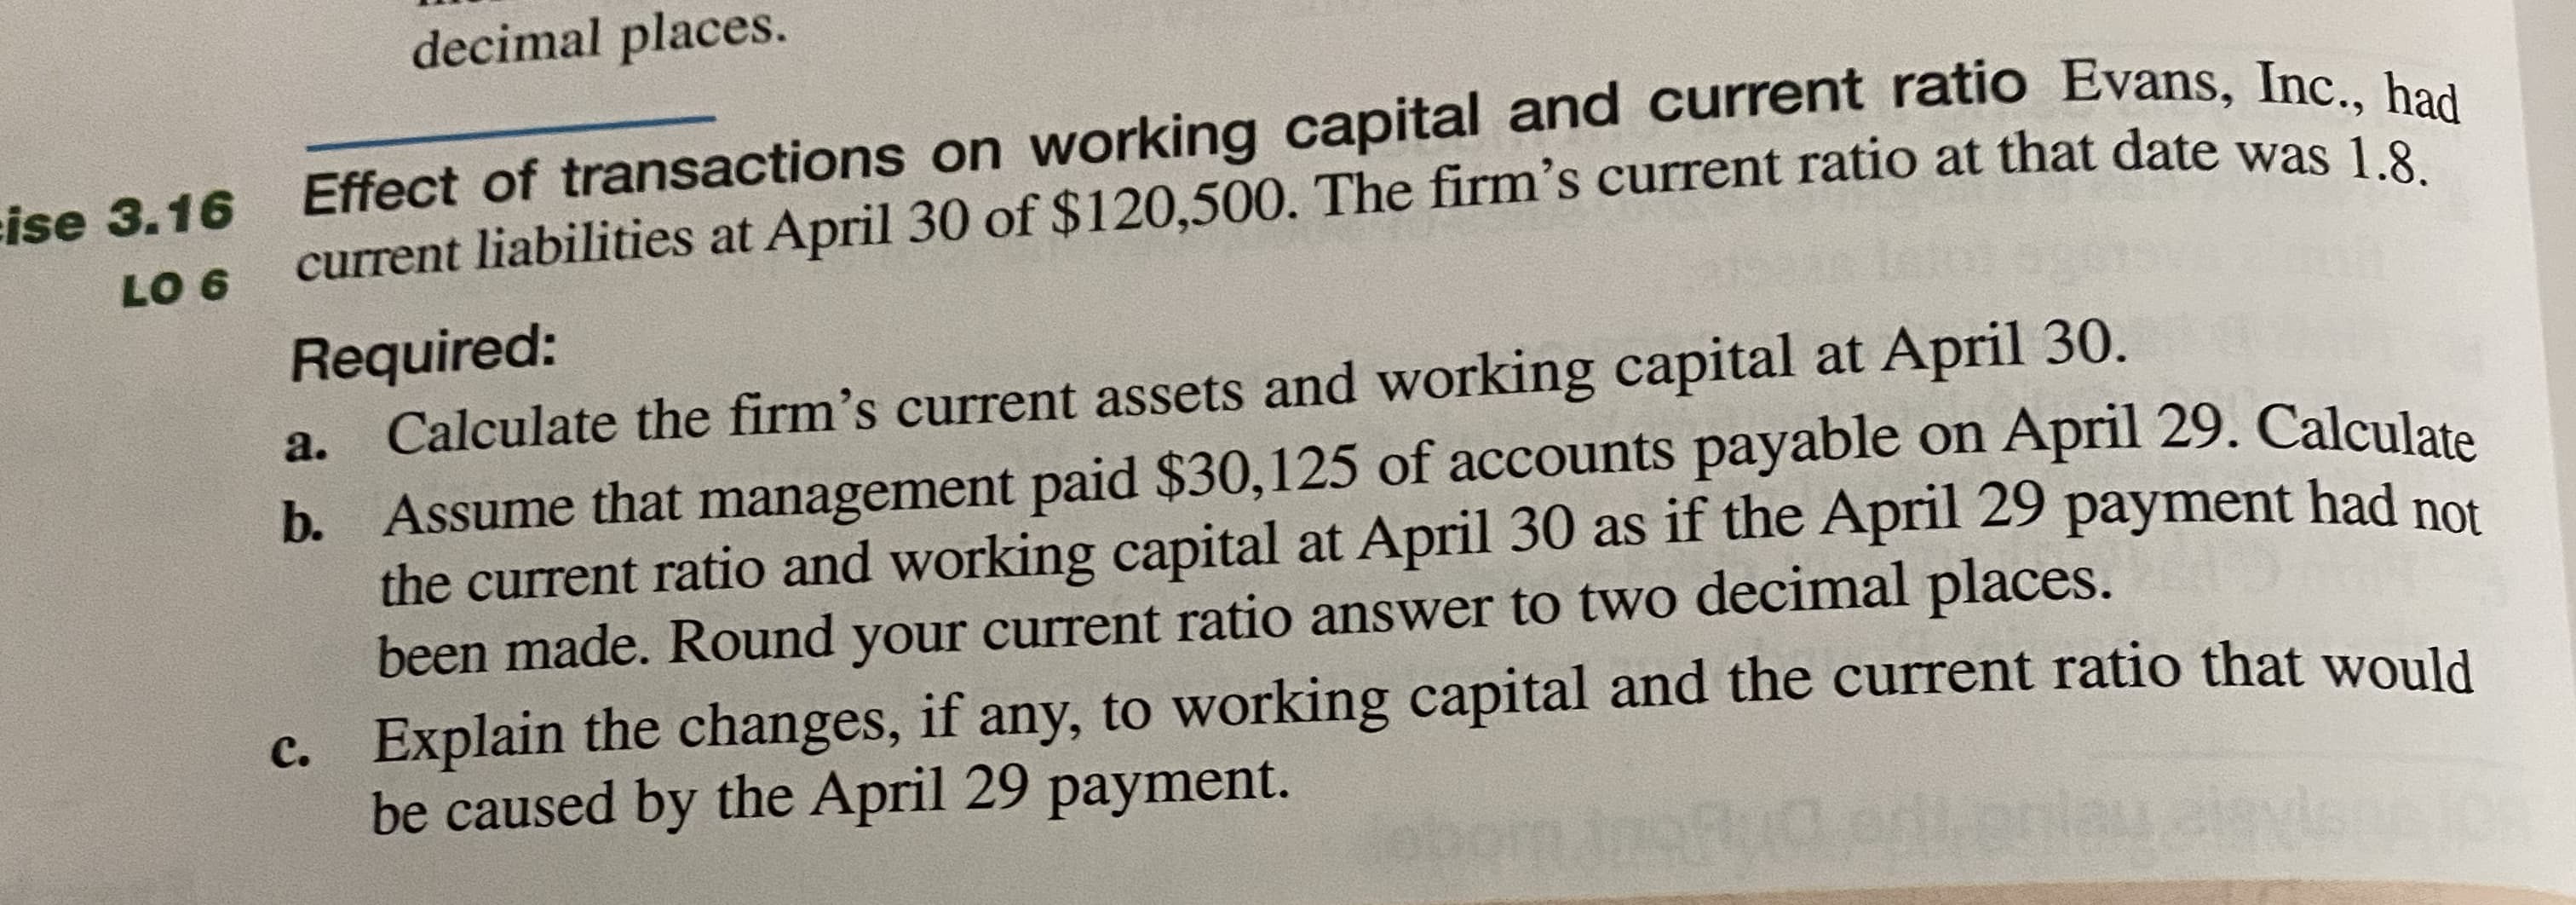 Effect of transactions on working capital and current ratio Evans, Inc haa
current liabilities at April 30 of $120,500. The firm's current ratio at that date was 1
Required:
Calculate the firm's current assets and working capital at April 30.
b. Assume that management paid $30,125 of accounts payable on April 29. Calculate
the current ratio and working capital at April 30 as if the April 29 payment had not
been made. Round your current ratio answer to two decimal places.
c. Explain the changes, if any, to working capital and the current ratio that would
be caused by the April 29 payment.
a.
